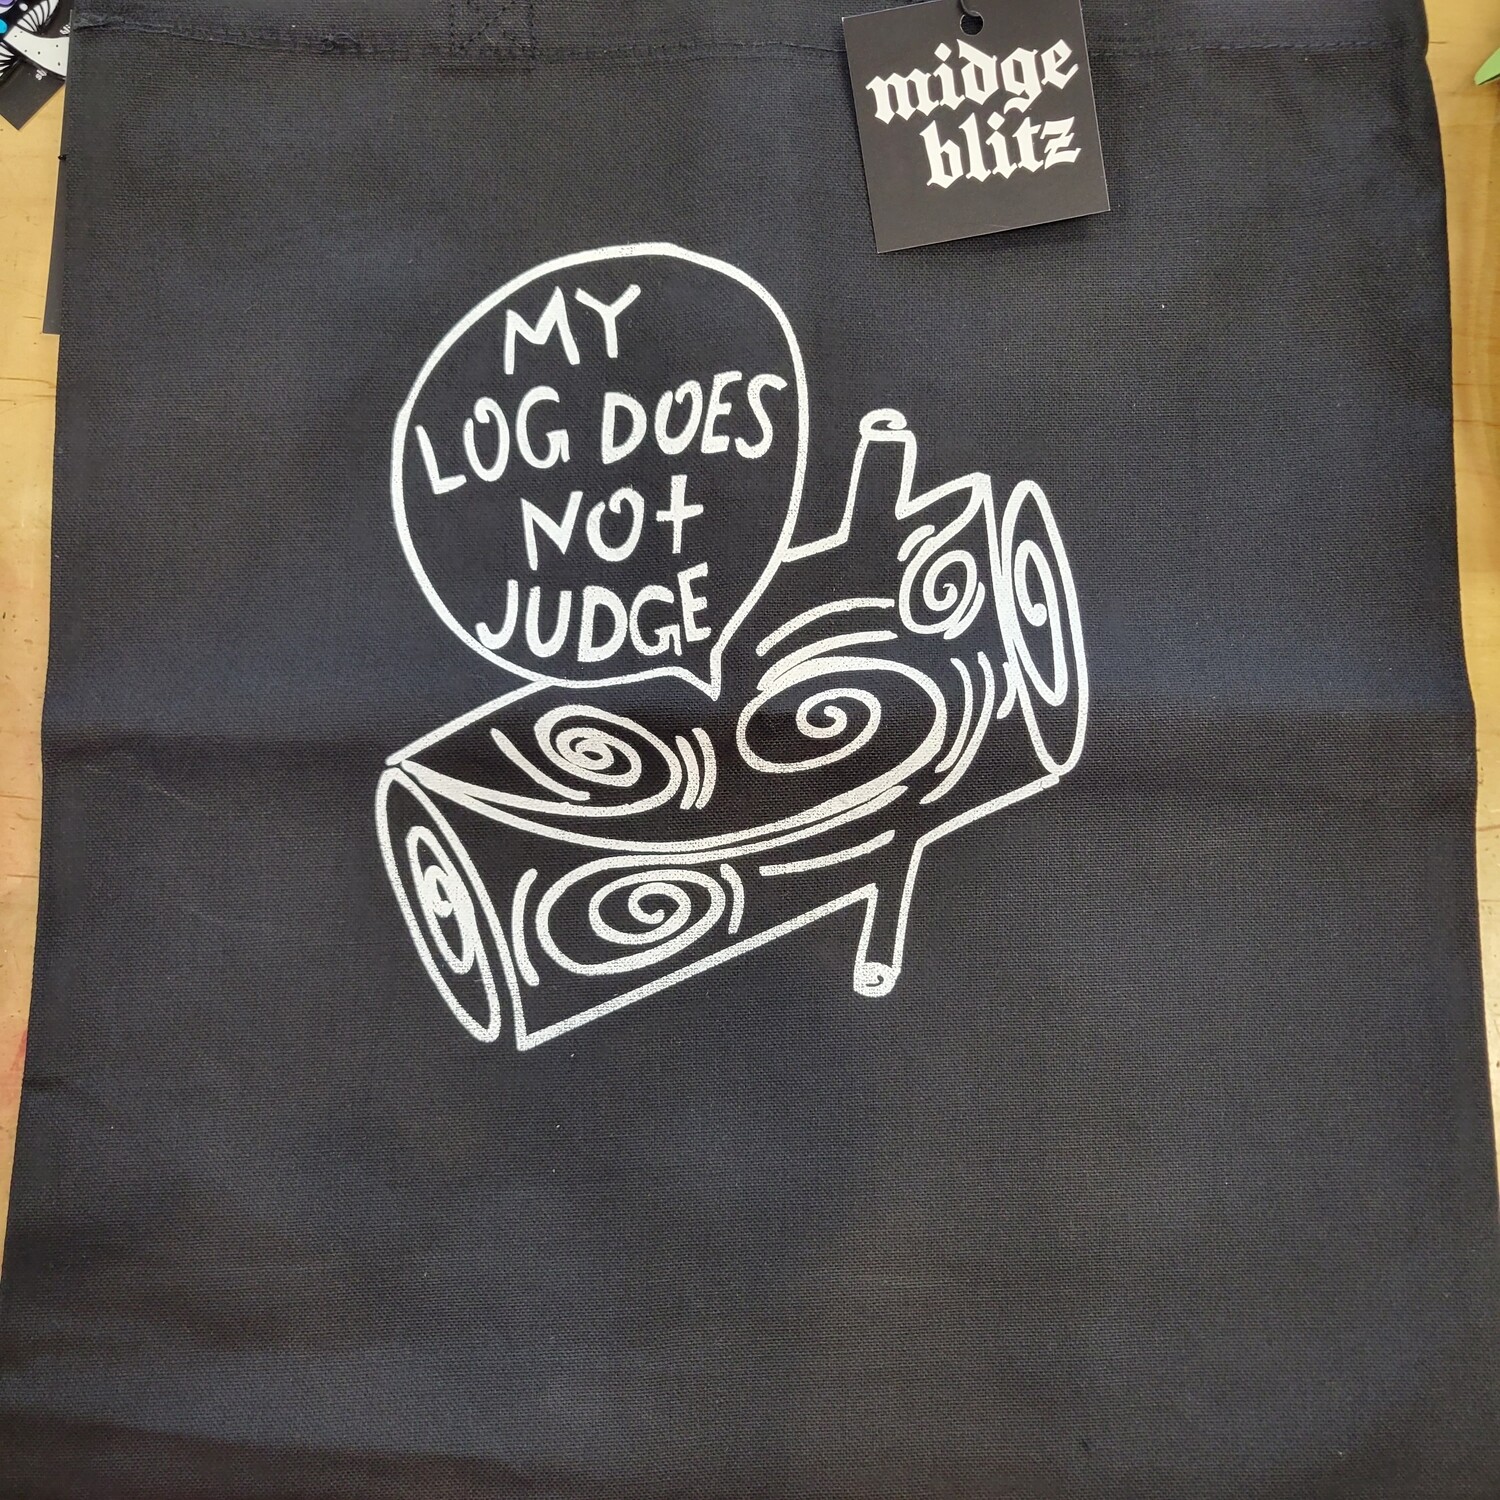 My Log Does Not Judge - Tote by Midge Blitz